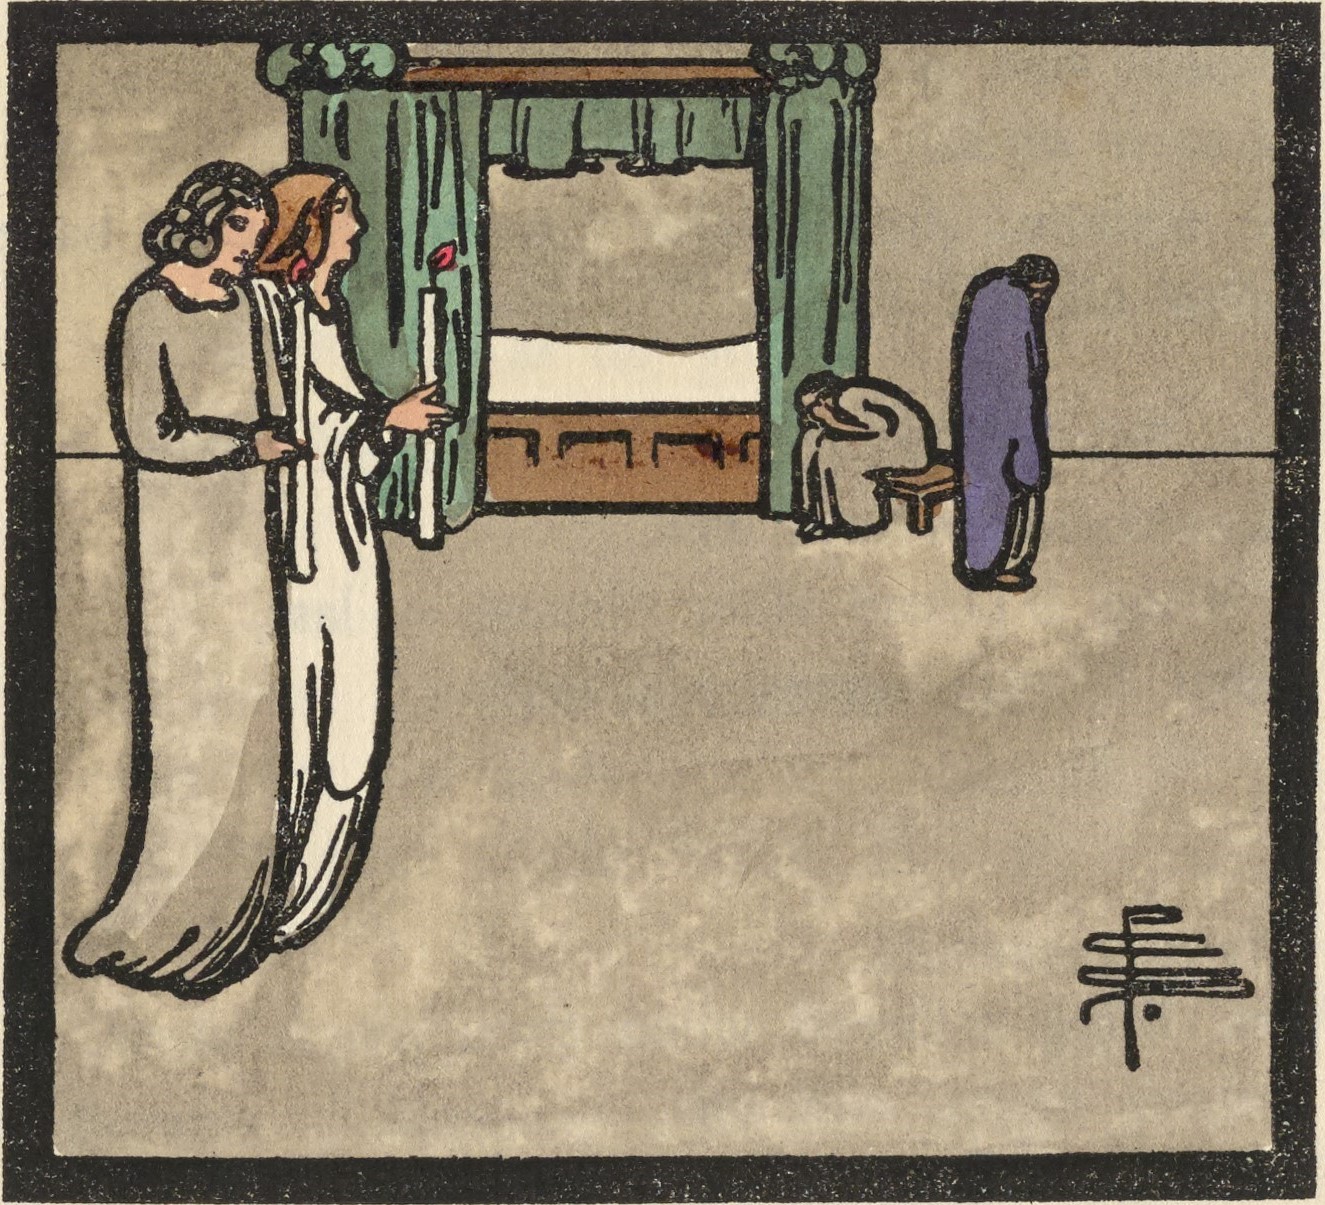 This hand-coloured half-page illustration is outlined in a thick, black square frame, centered above the text of “A Lyke-Wake Dirge.” In the left foreground, two pale-skinned figures, one in gray with black hair, one in white with golden hair, each carrying a lit candle, enter a gray-toned room. In the background of the room is a green-canopied bed with white sheets. A grey figure sits on a stool beside the bed, hunched over. To the right, a purple robed figure walks away from the bed. The artist’s monogram is in the bottom right.